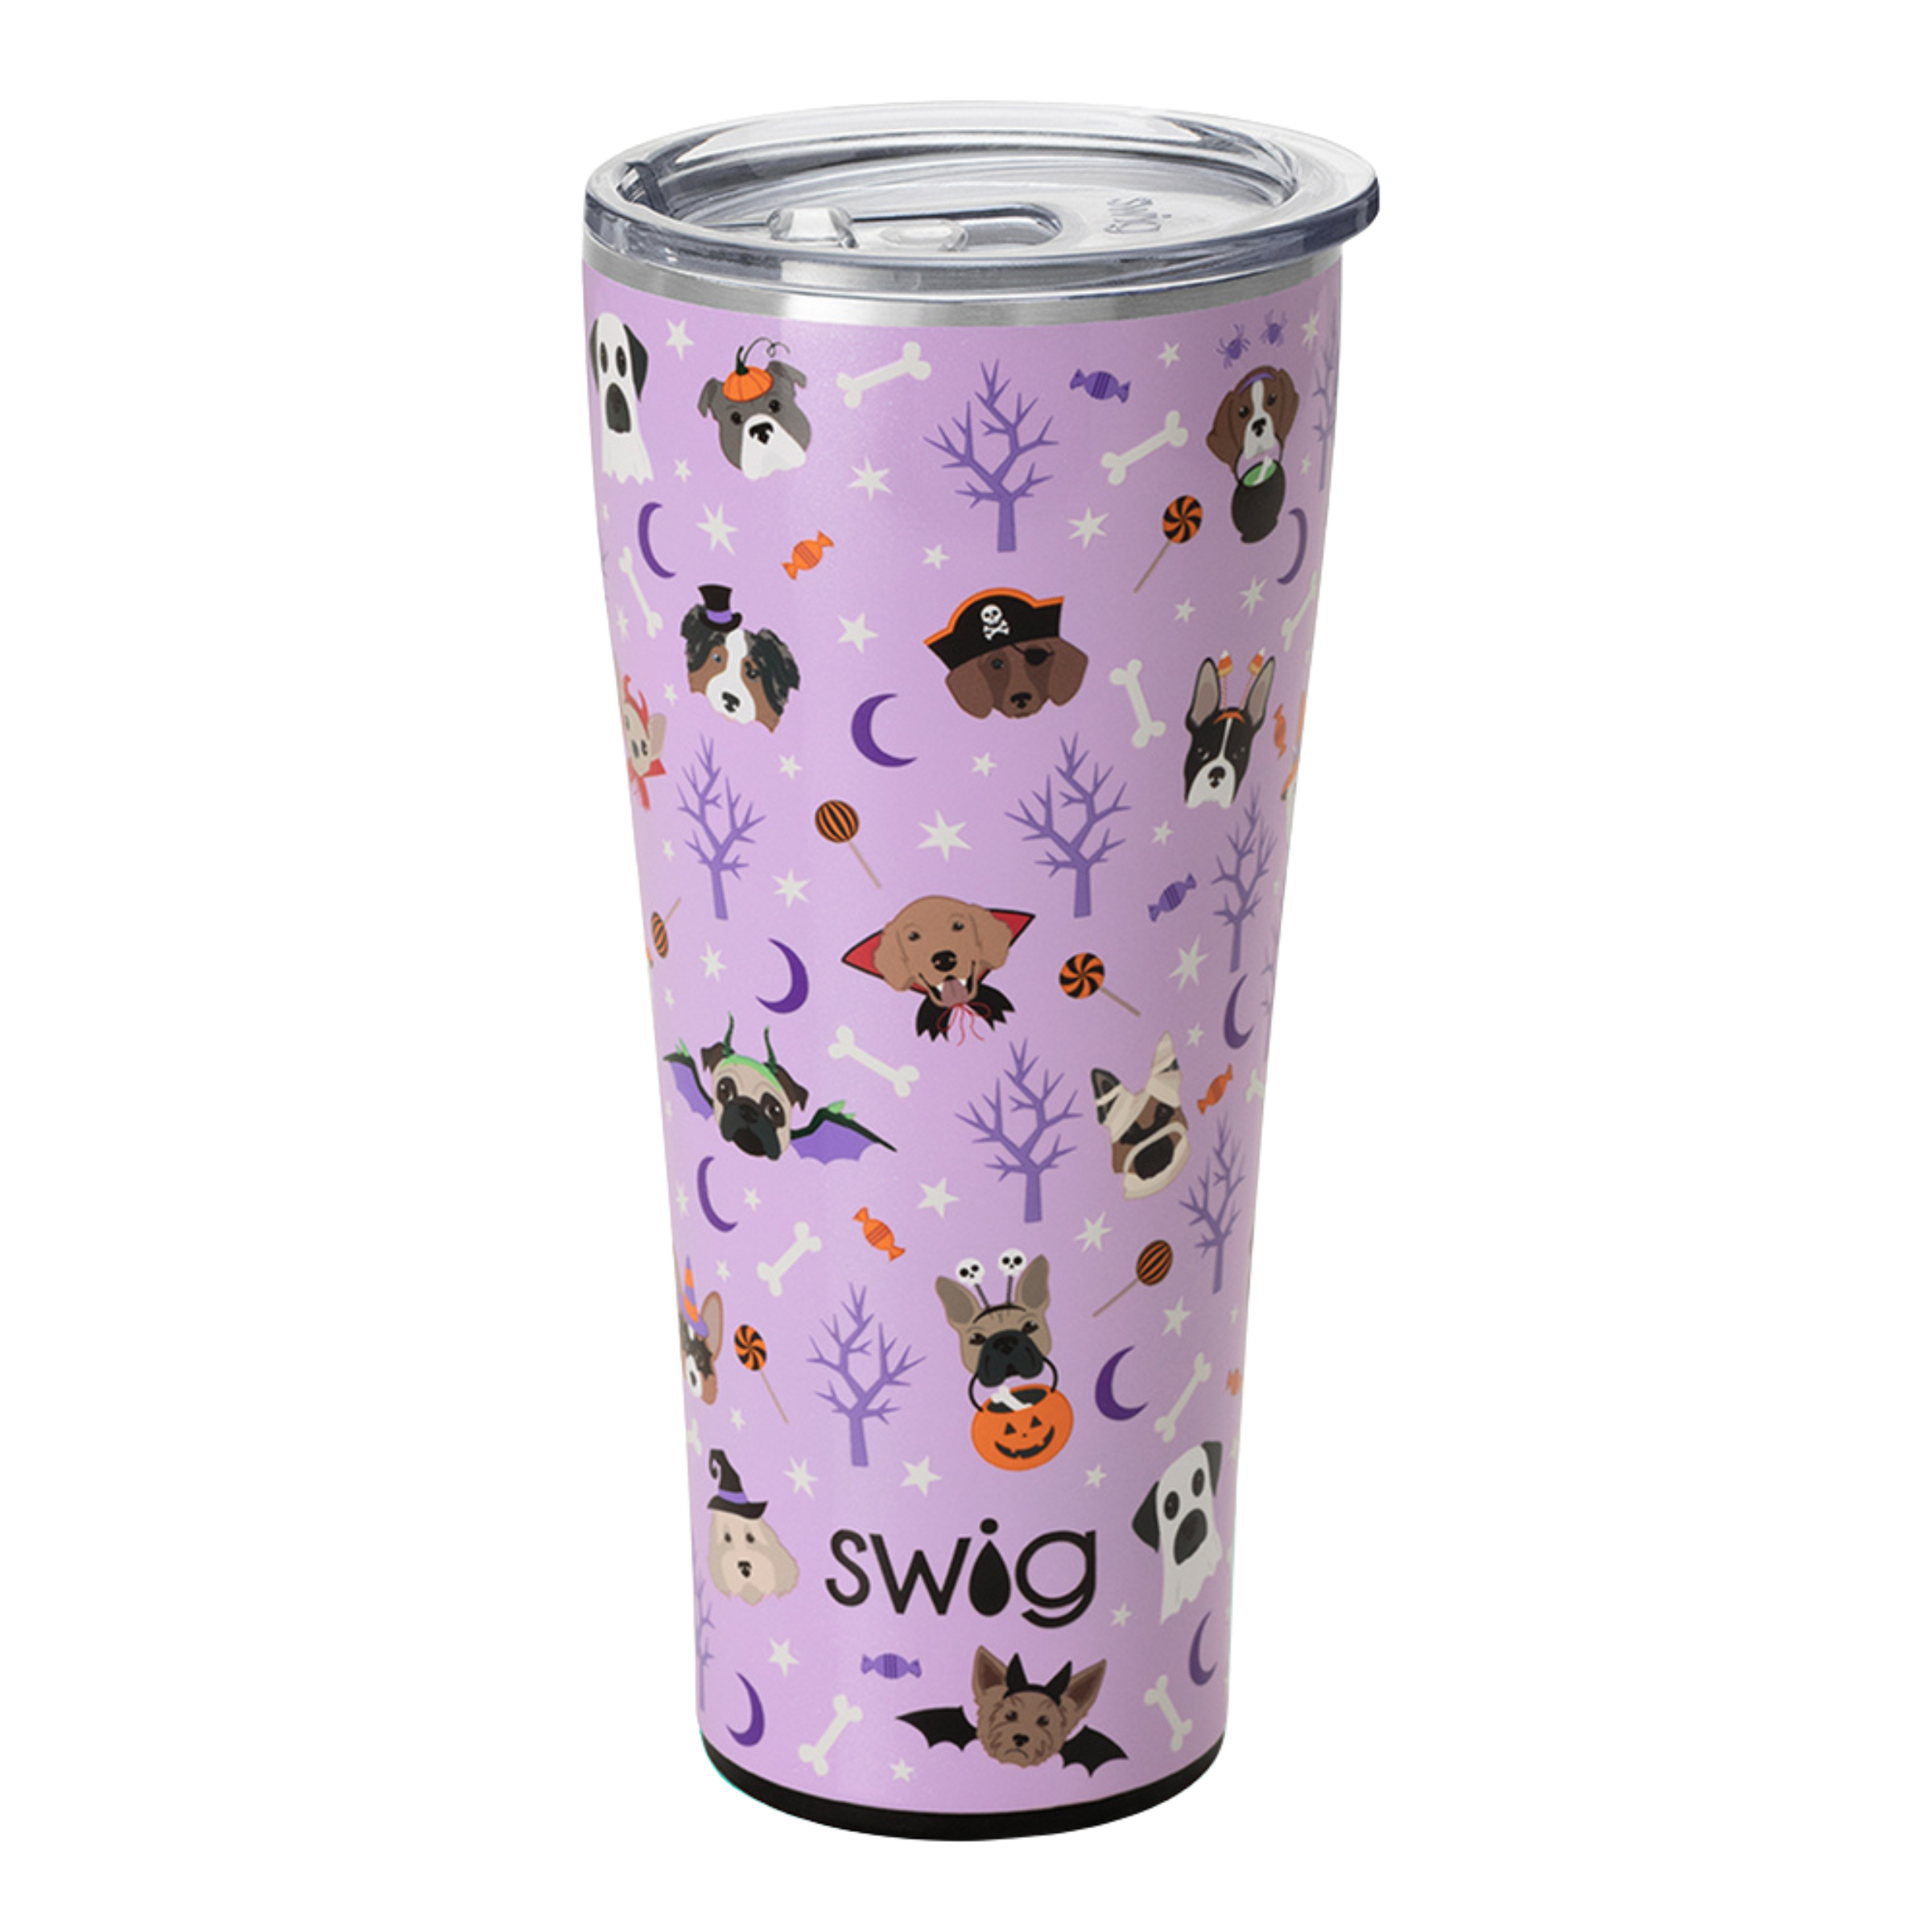 Howl-o-ween 32 ooz tumbler cup. This cup is purple with halloween themed dog decorations. The cup is pictured on a white background